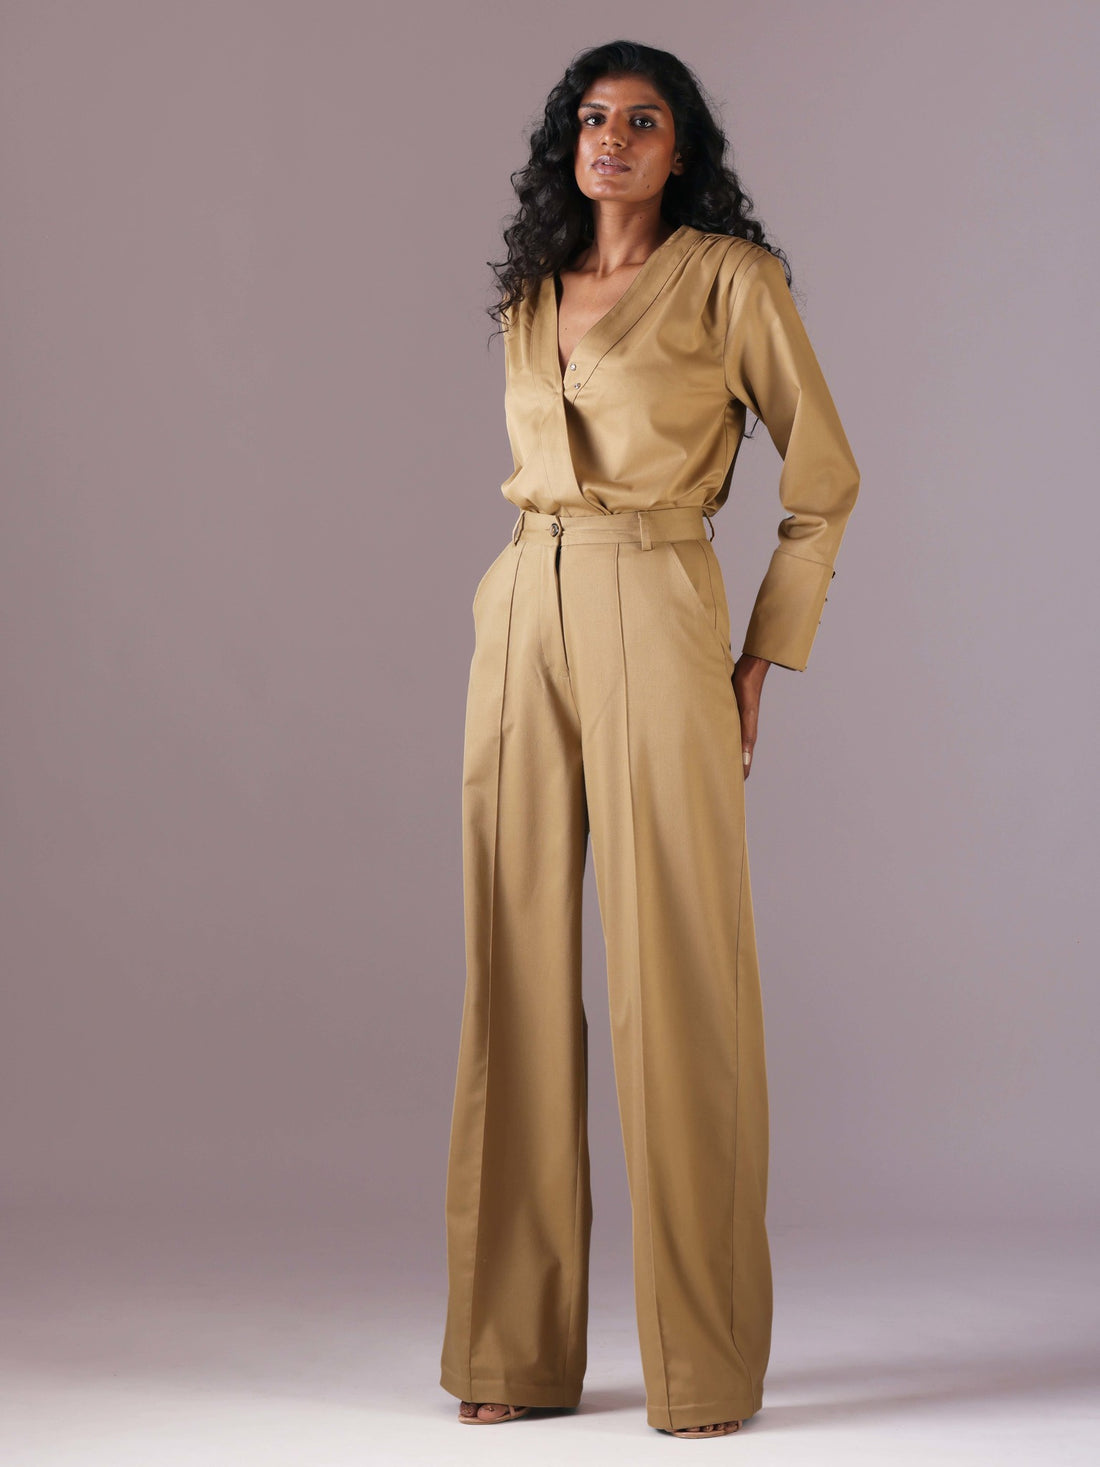 Michele wide legged pants in Color Camel